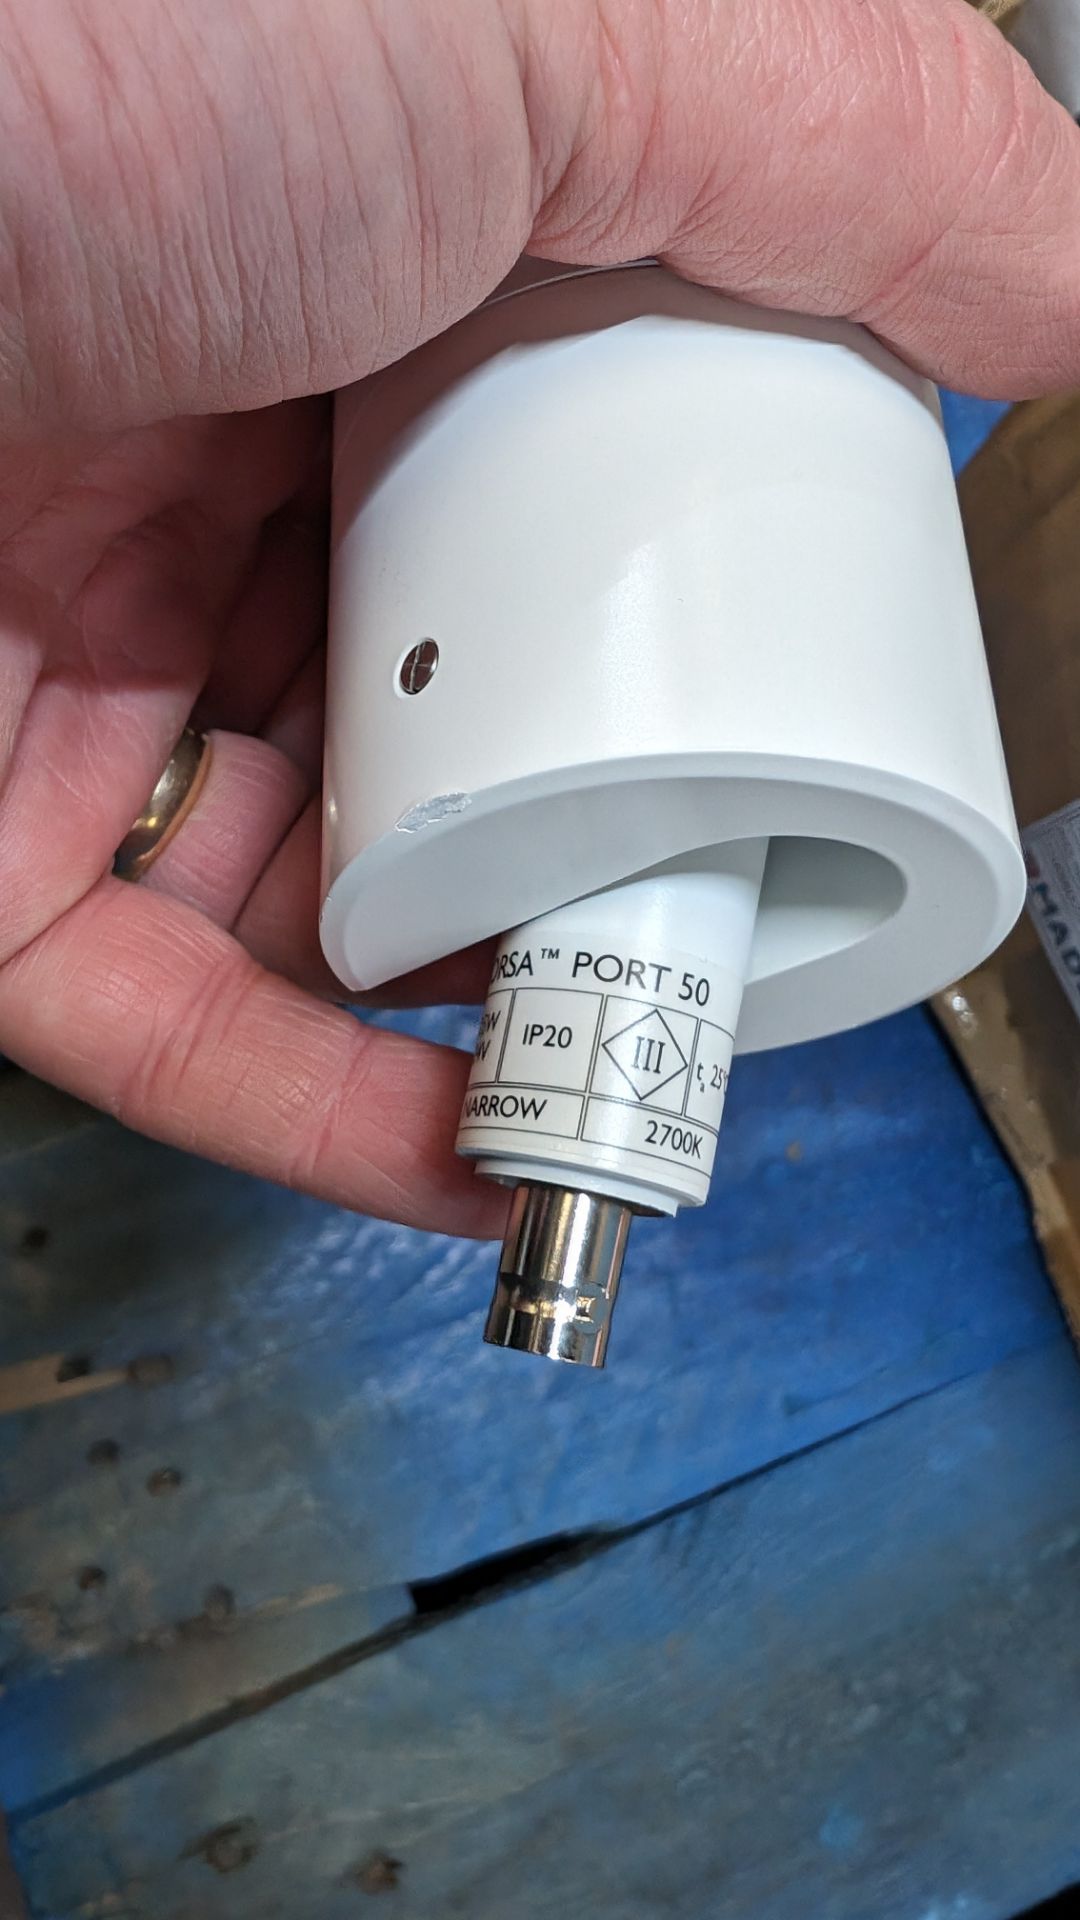 13 off Vorsa Port50 IP20 LED white spot lamps for use with tracking systems - tracking fitting requi - Image 3 of 7